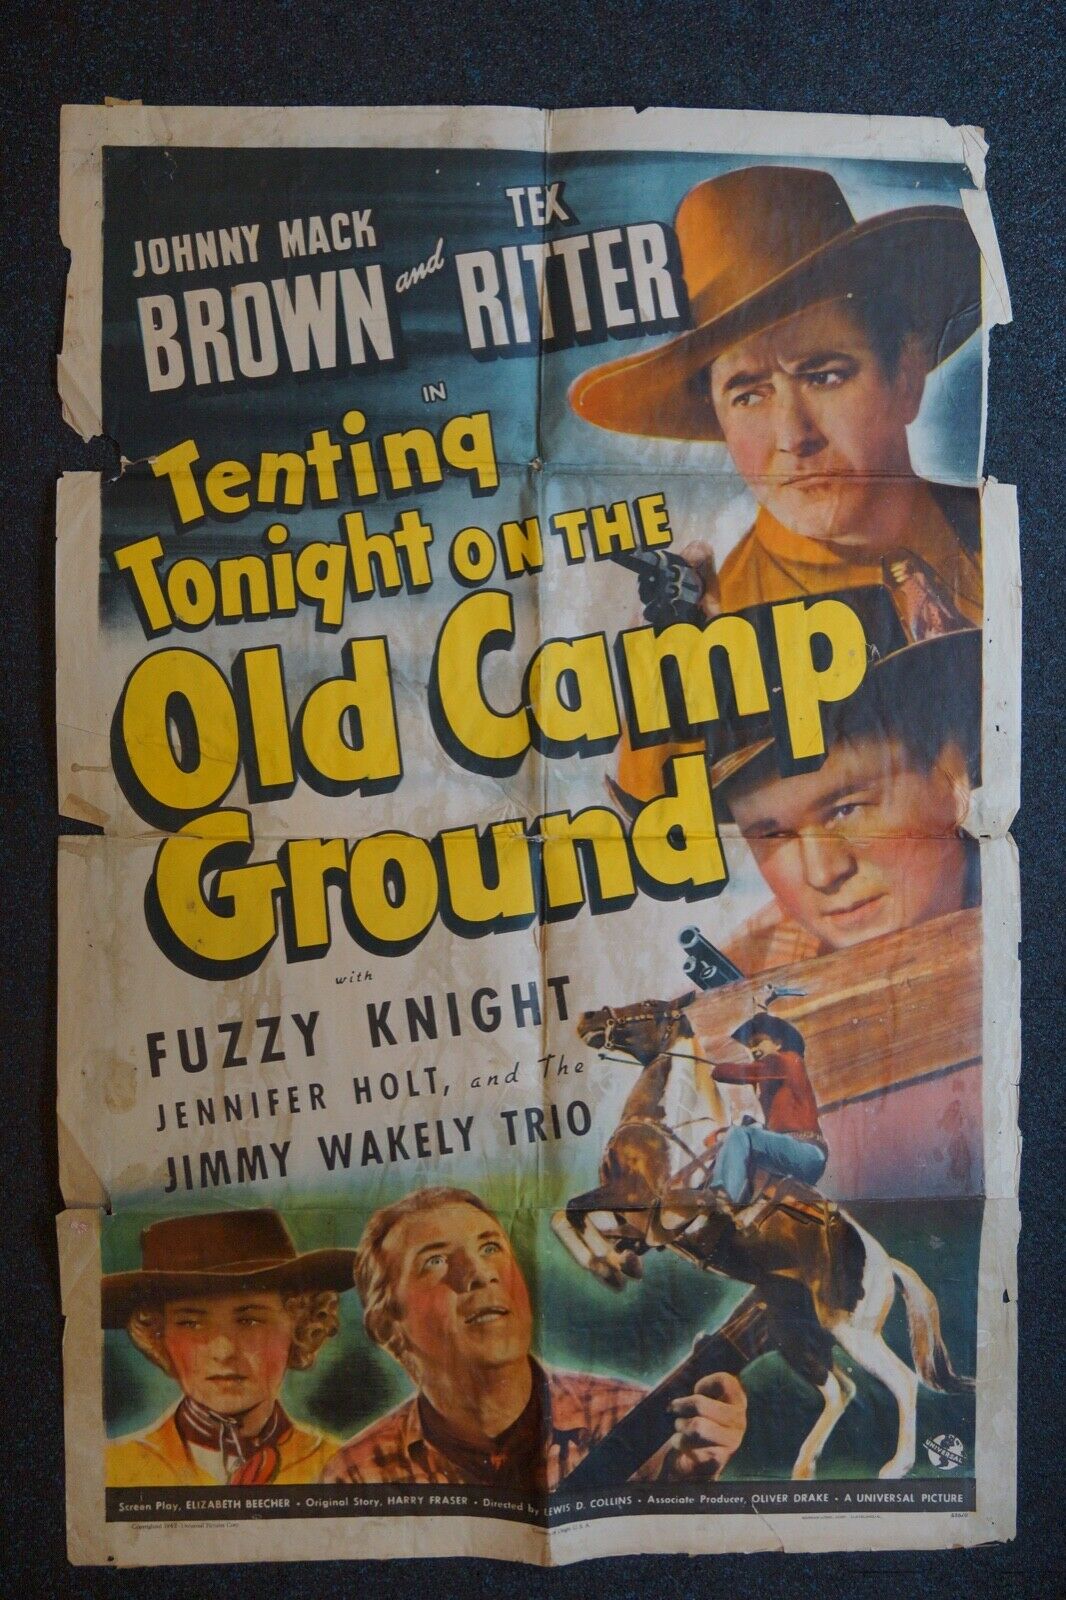 Tenting Tonight On The Old Camp Ground - Johnny Mack Brown